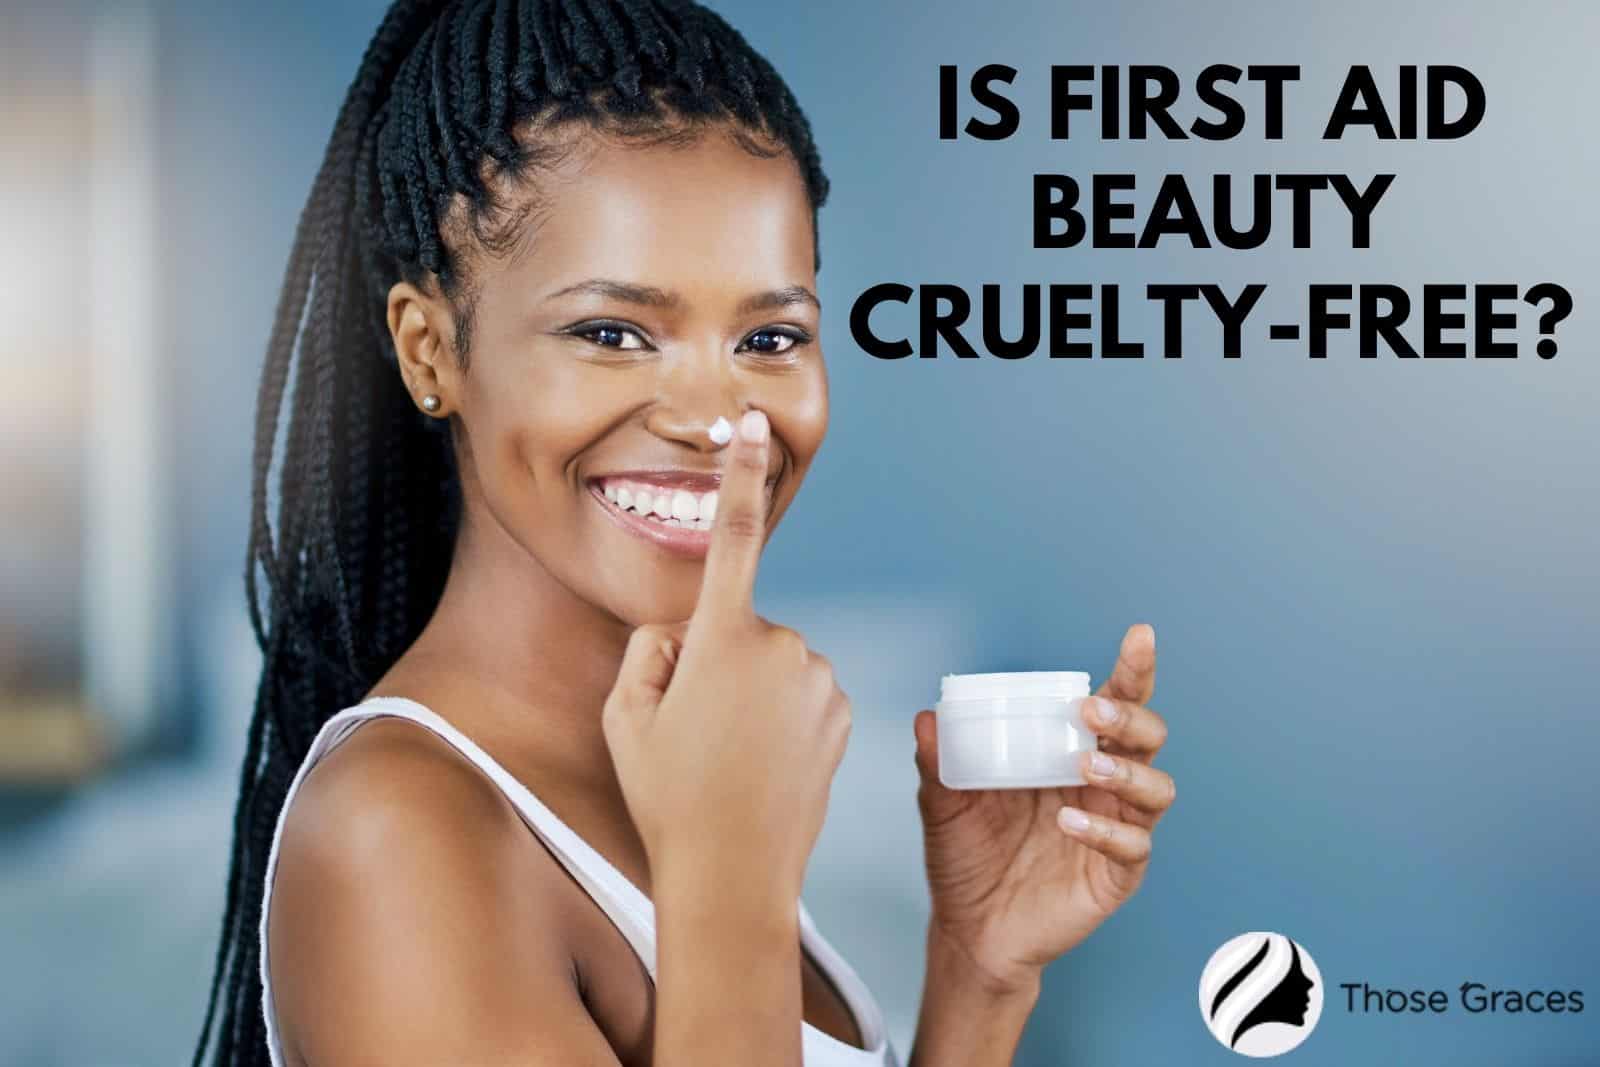 a beautiful lady holding a cream with the question "Is First Aid Beauty cruelty free?"